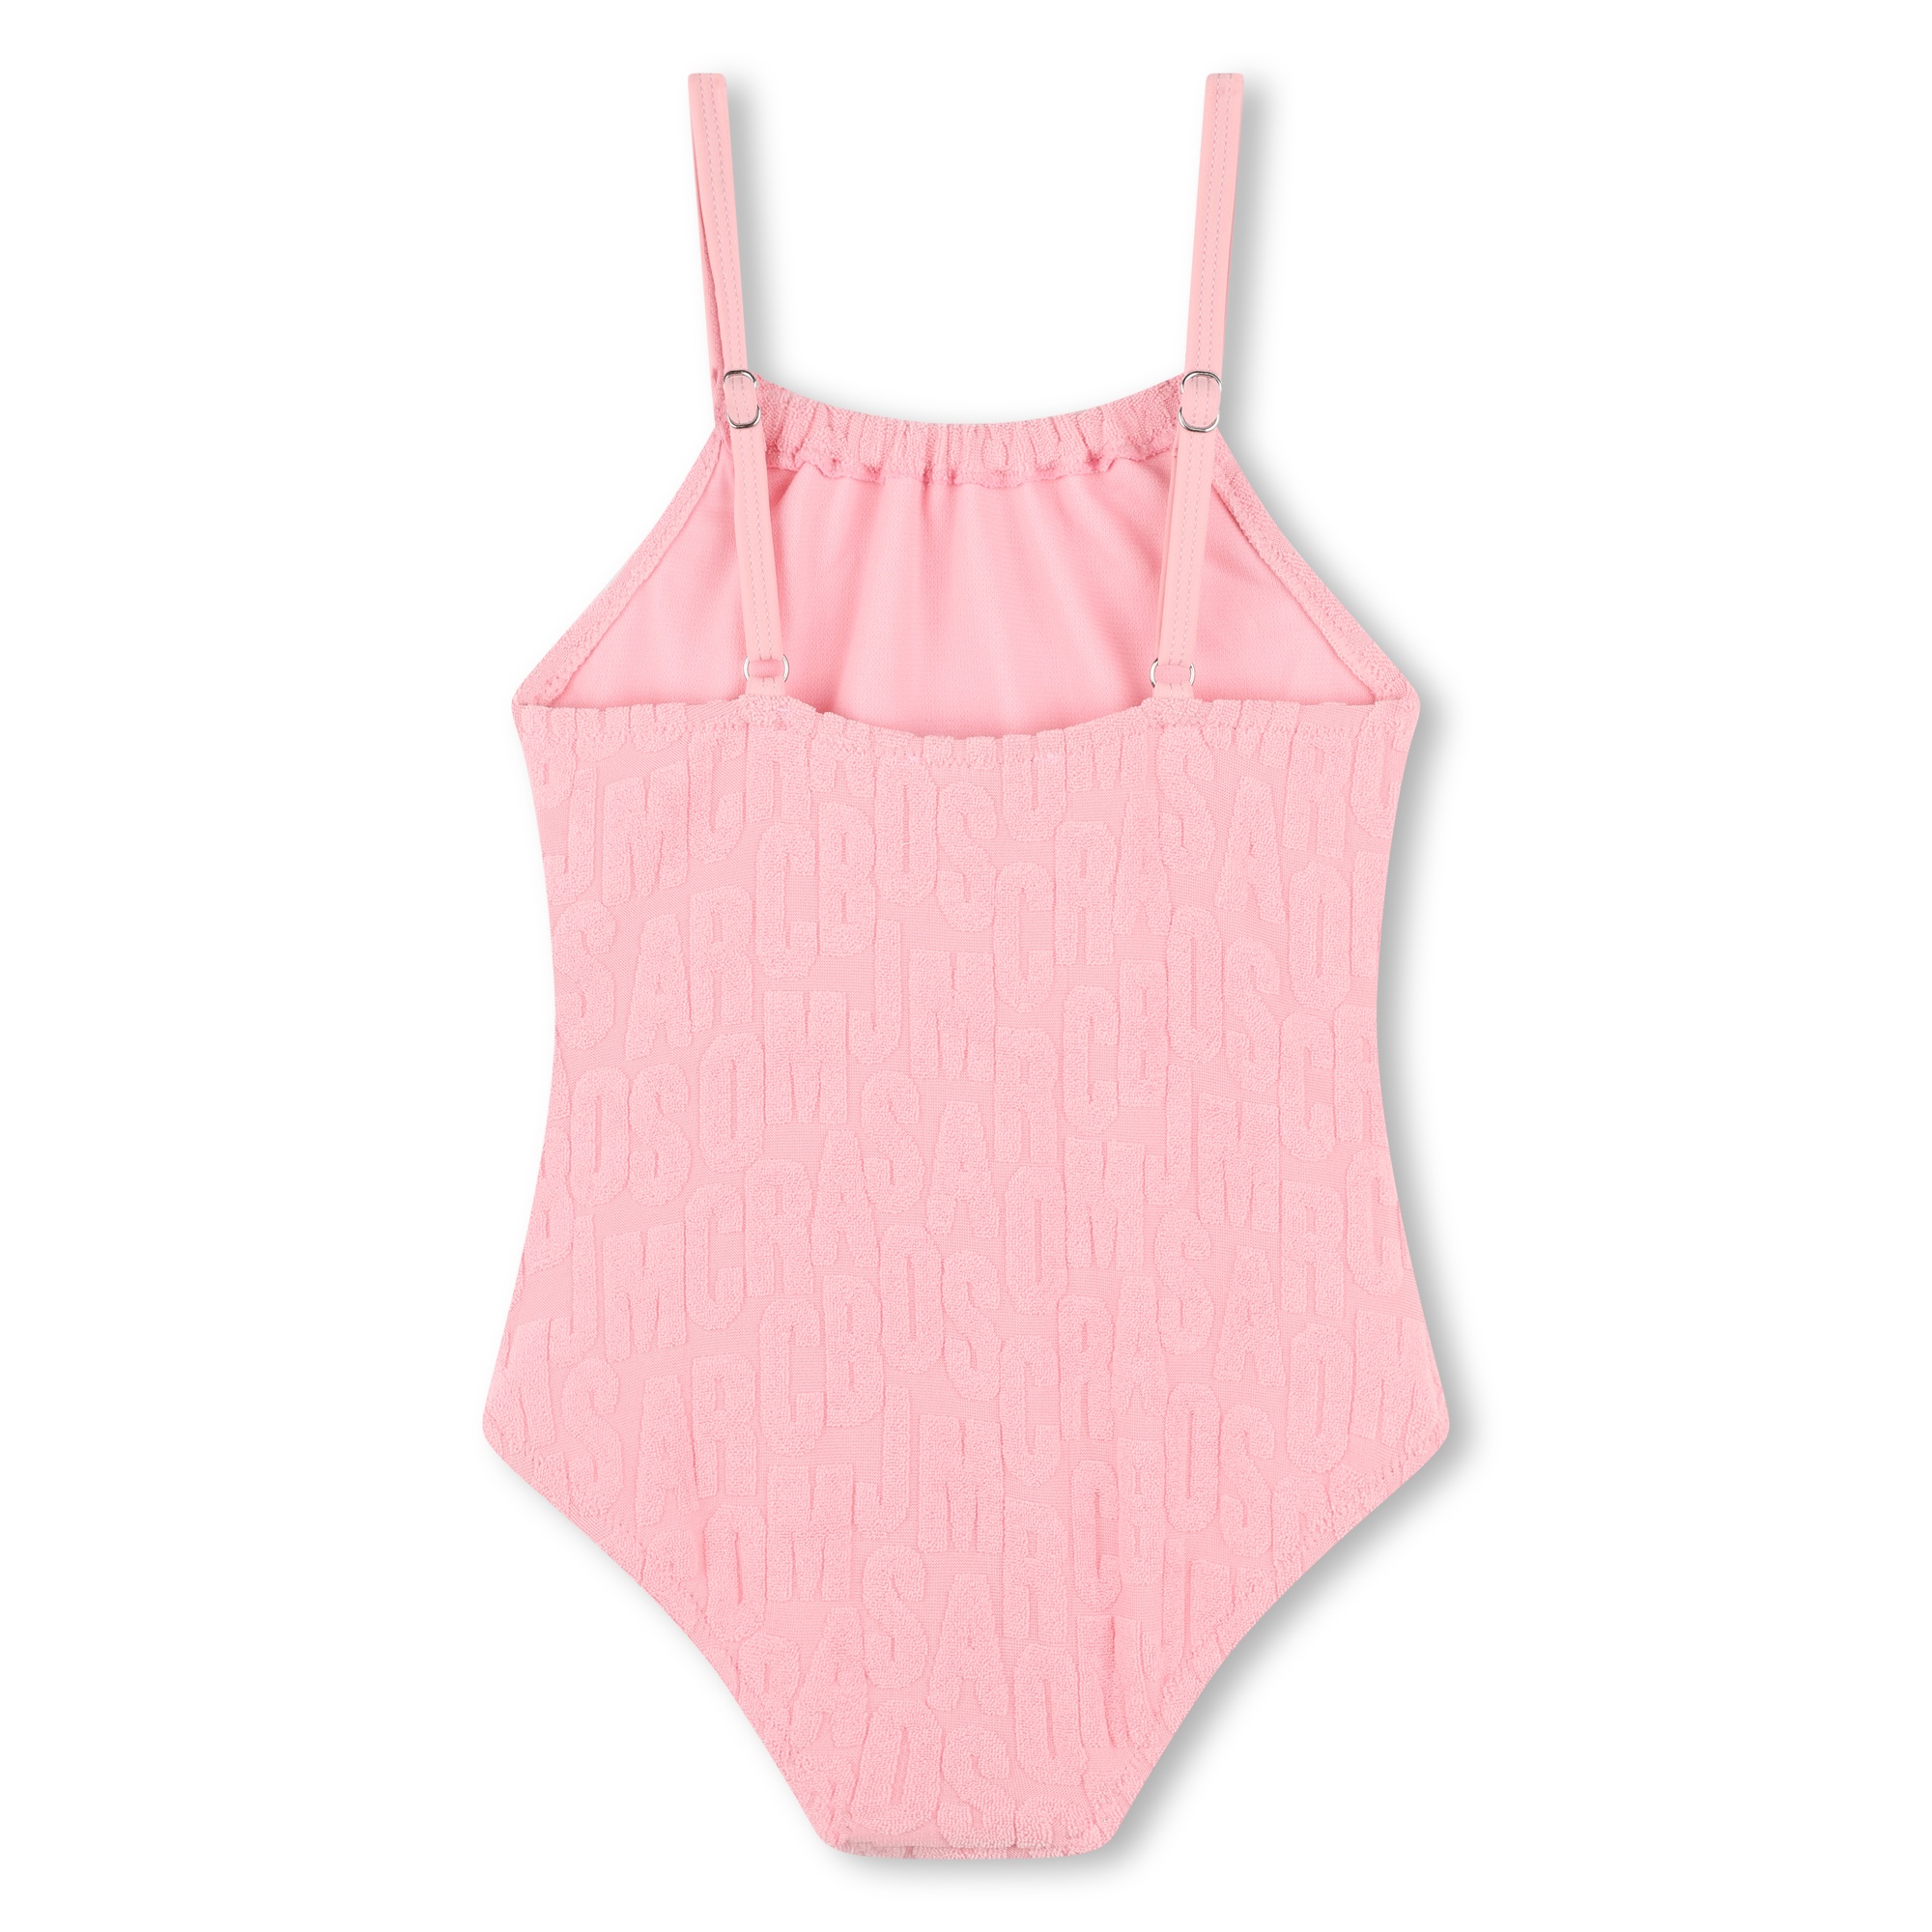 Terry towel bathing suit MARC JACOBS for GIRL